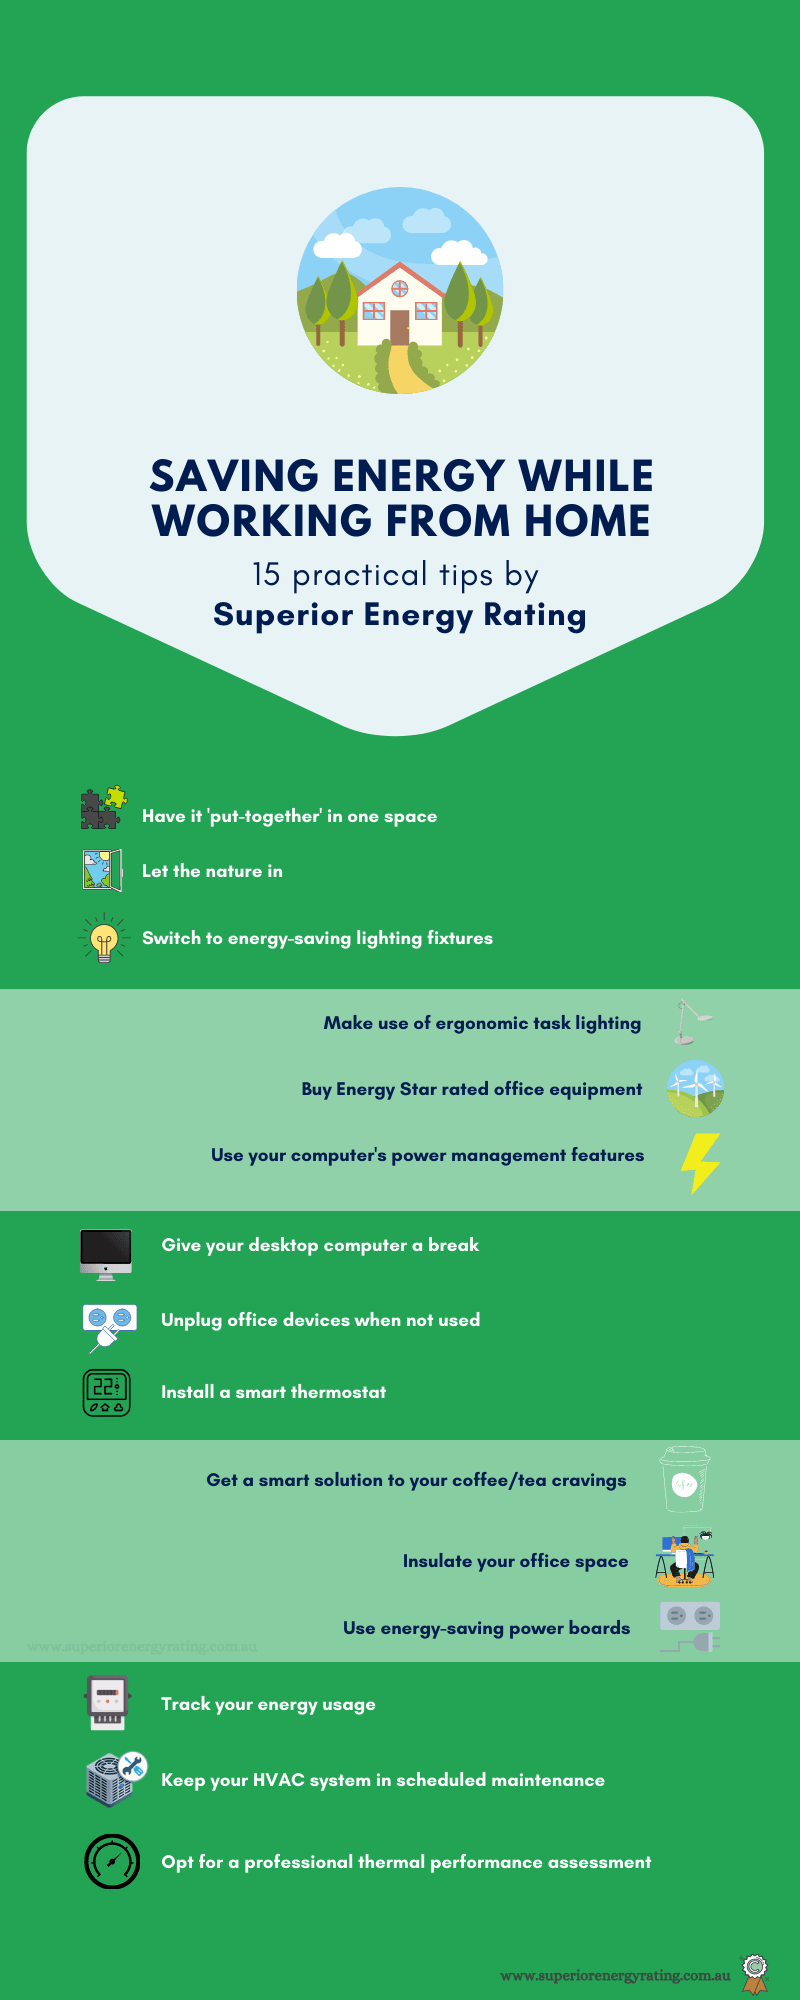 15 Energy Saving Tips While Working from Home - Superior Energy Rating